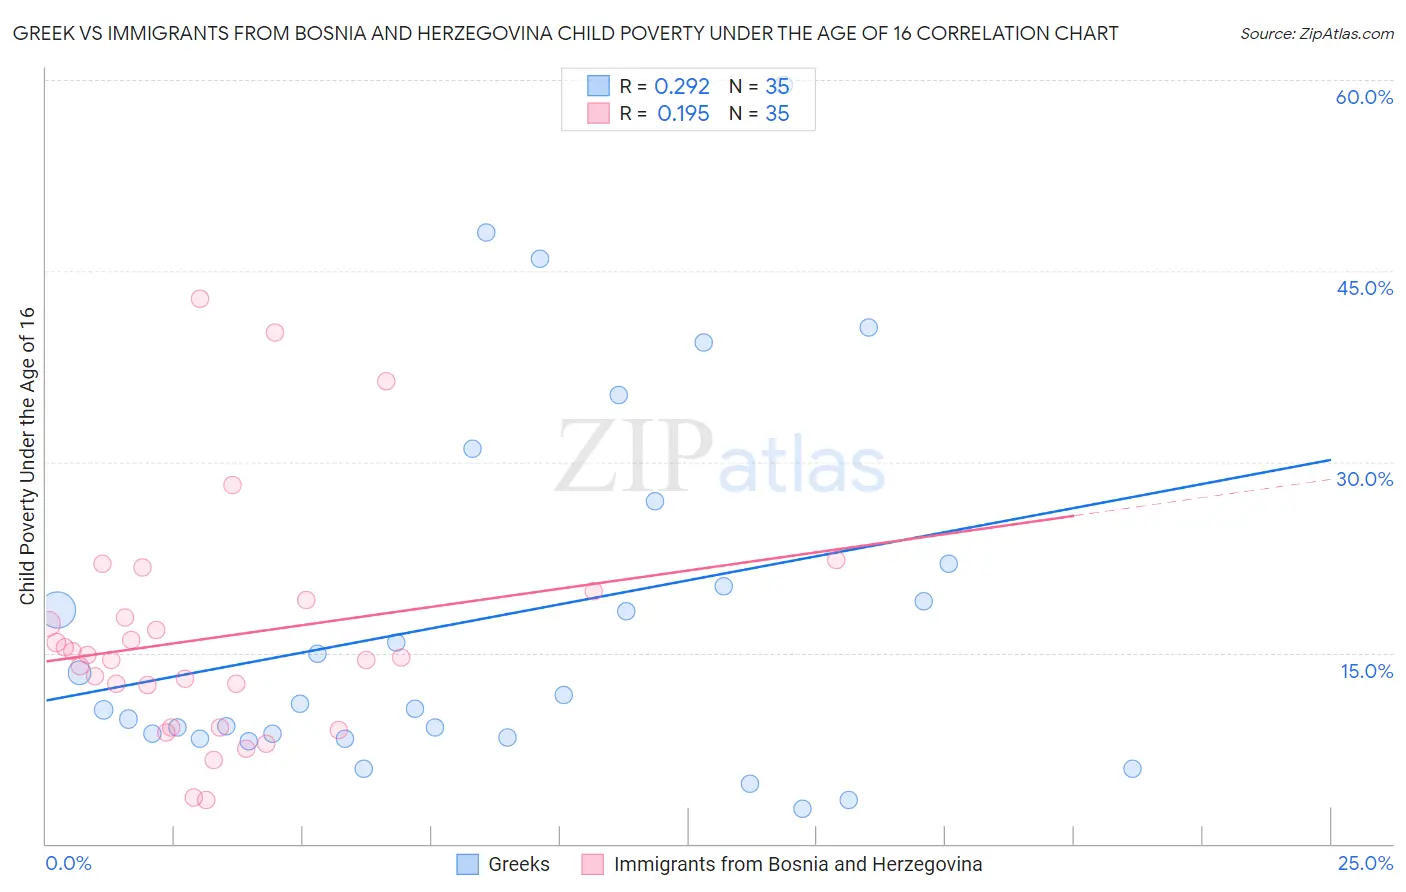 Greek vs Immigrants from Bosnia and Herzegovina Child Poverty Under the Age of 16